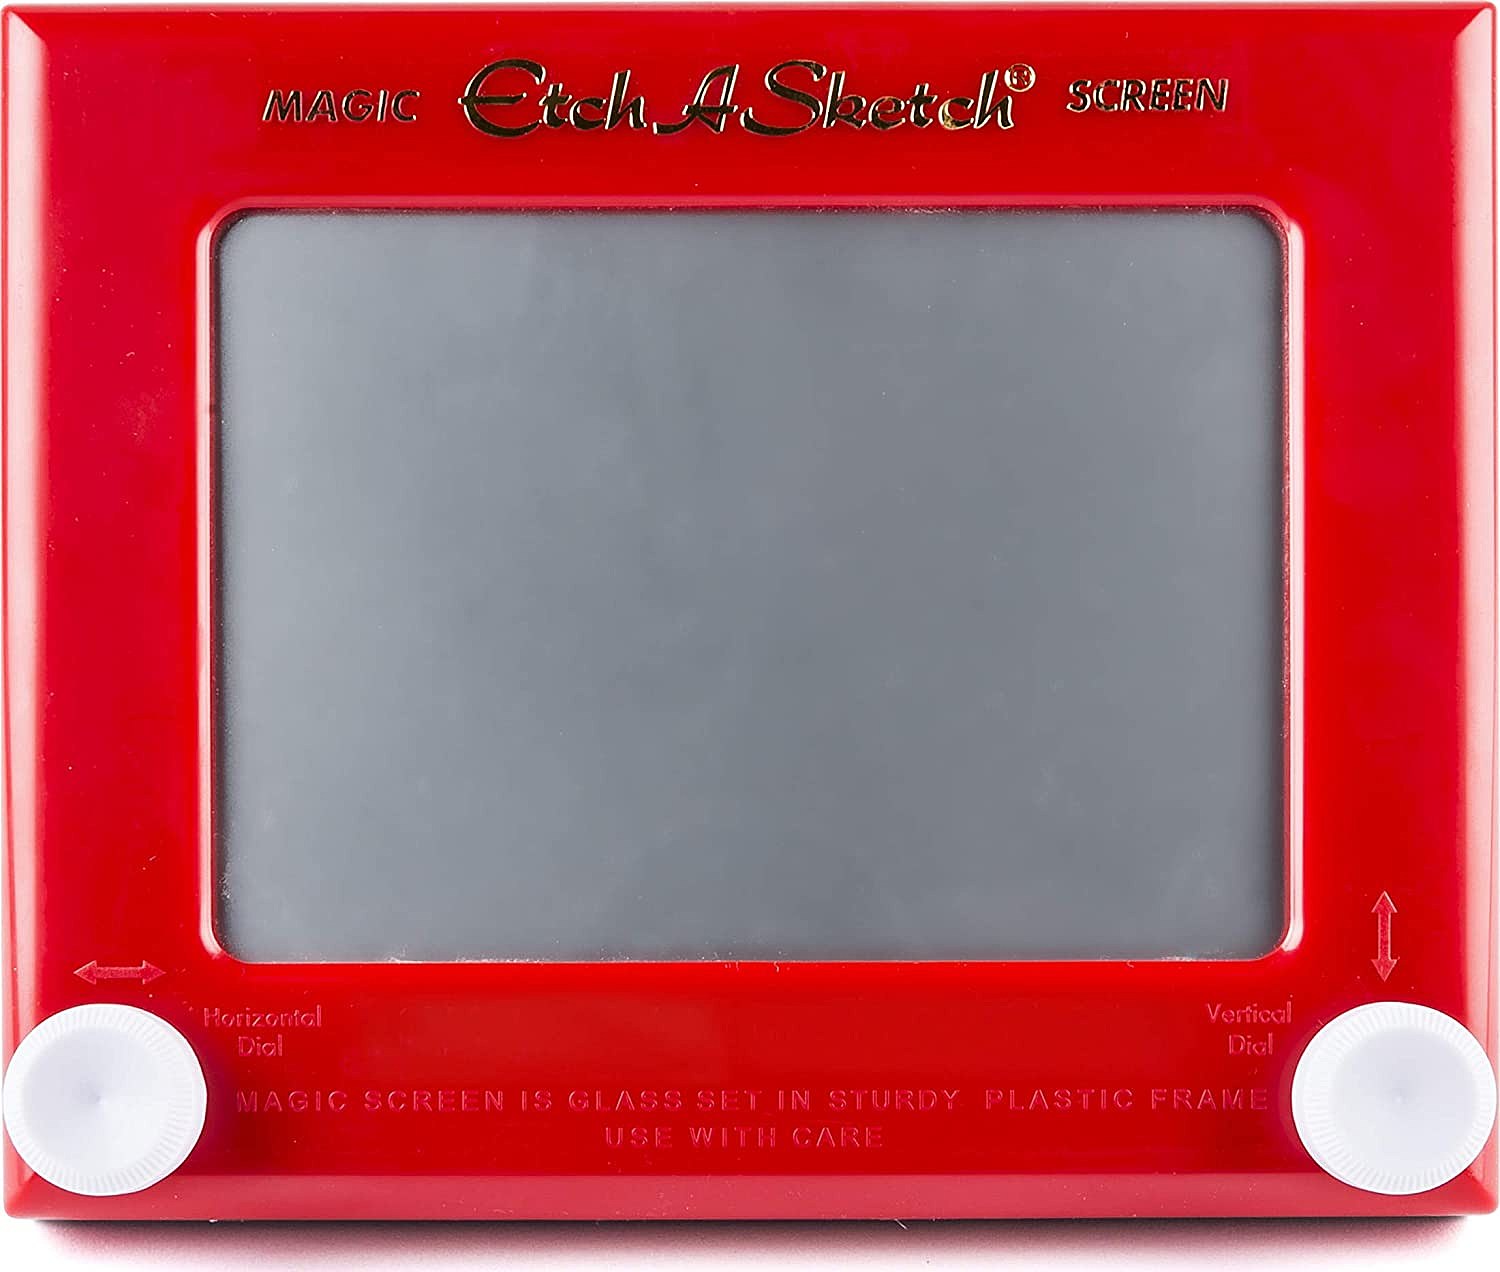 Etch-A-Sketch Portraits: Immortalize Your Image On a Toy